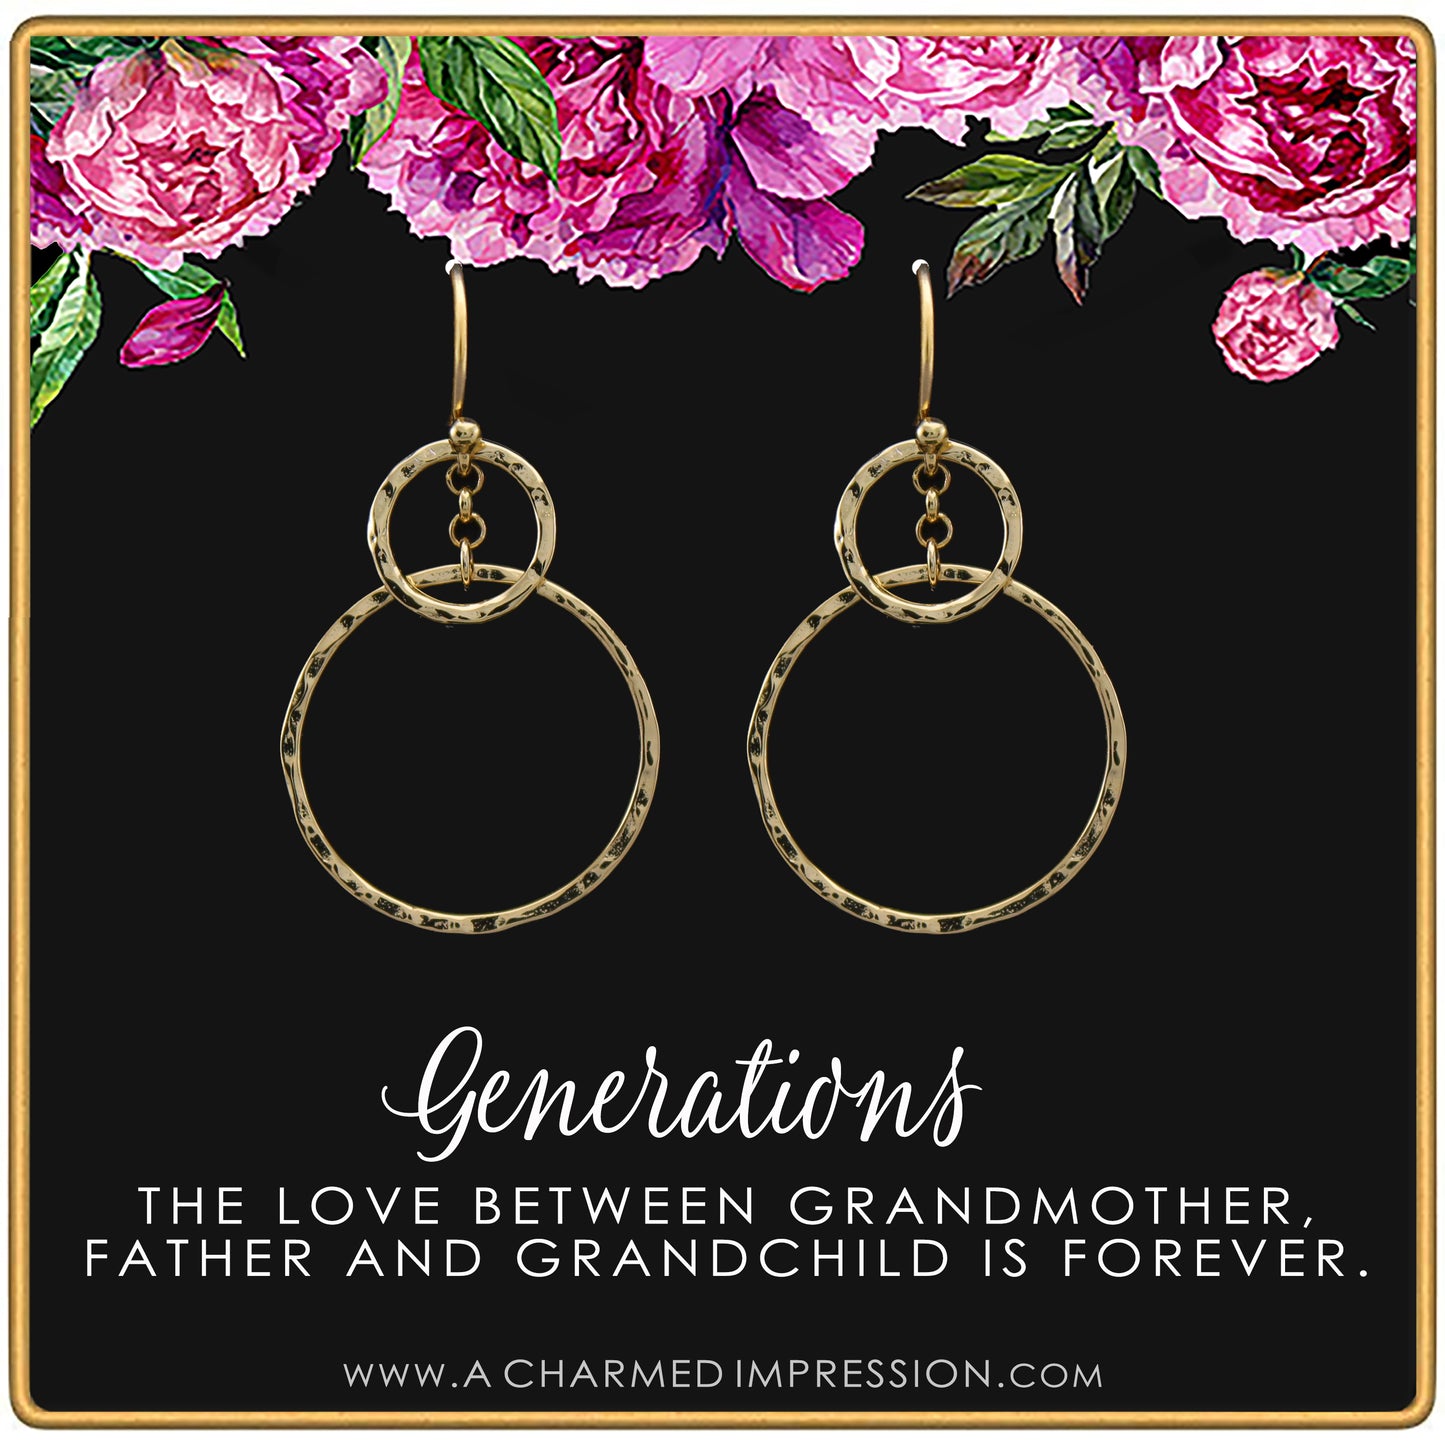 Three Generations Earrings • Best Grandma Gifts • Grandmother, Father, Grandchild Gifts for Mothers Day Jewelry Birthday • Hammered Rings Earrings